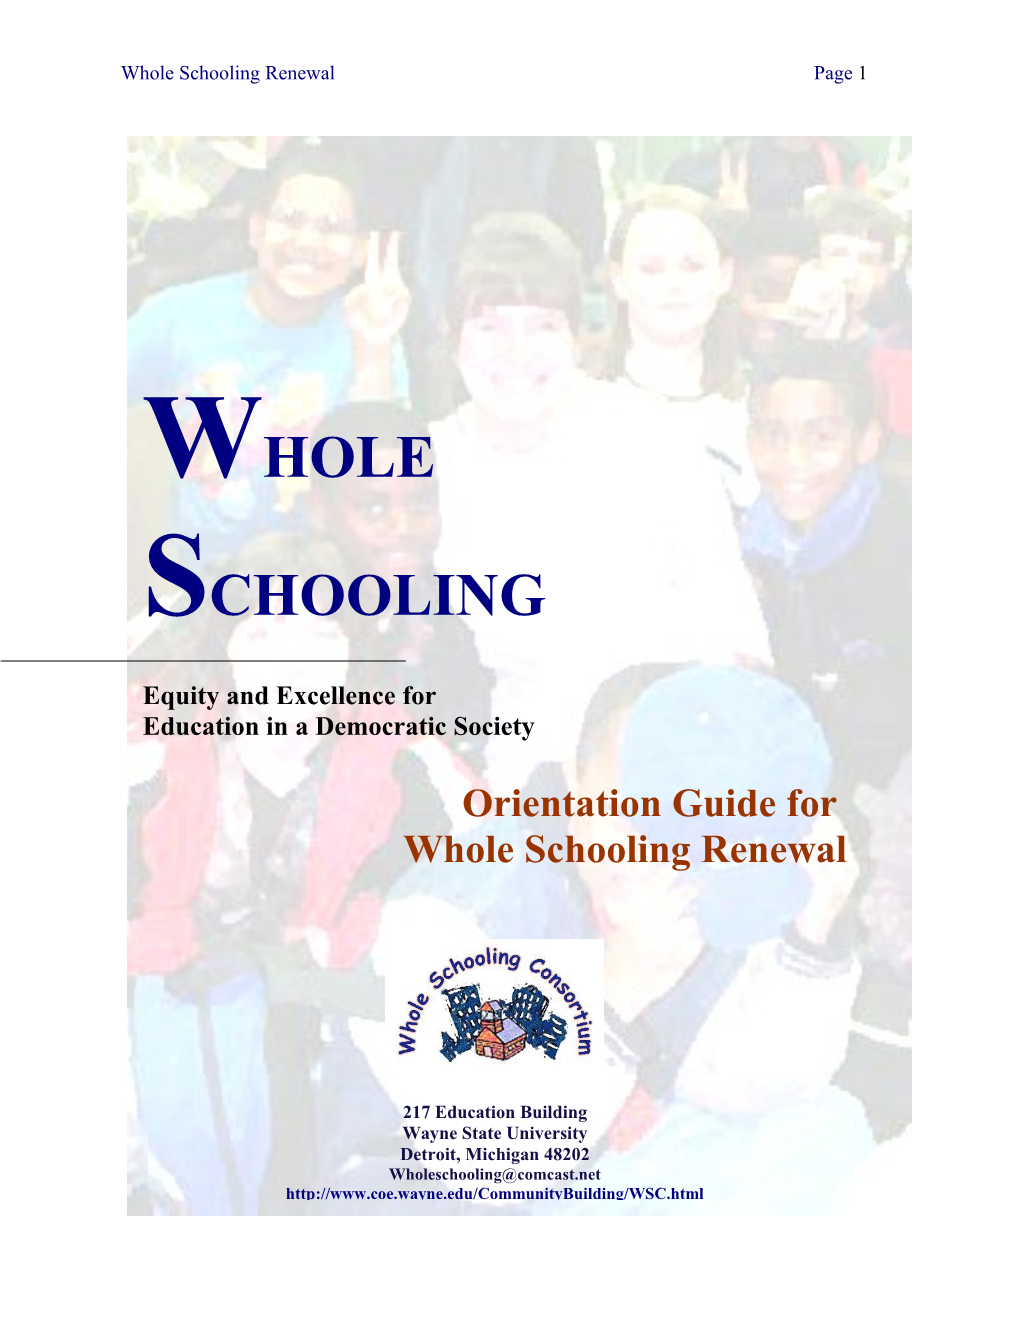 Whole Schooling Renewal Page 1